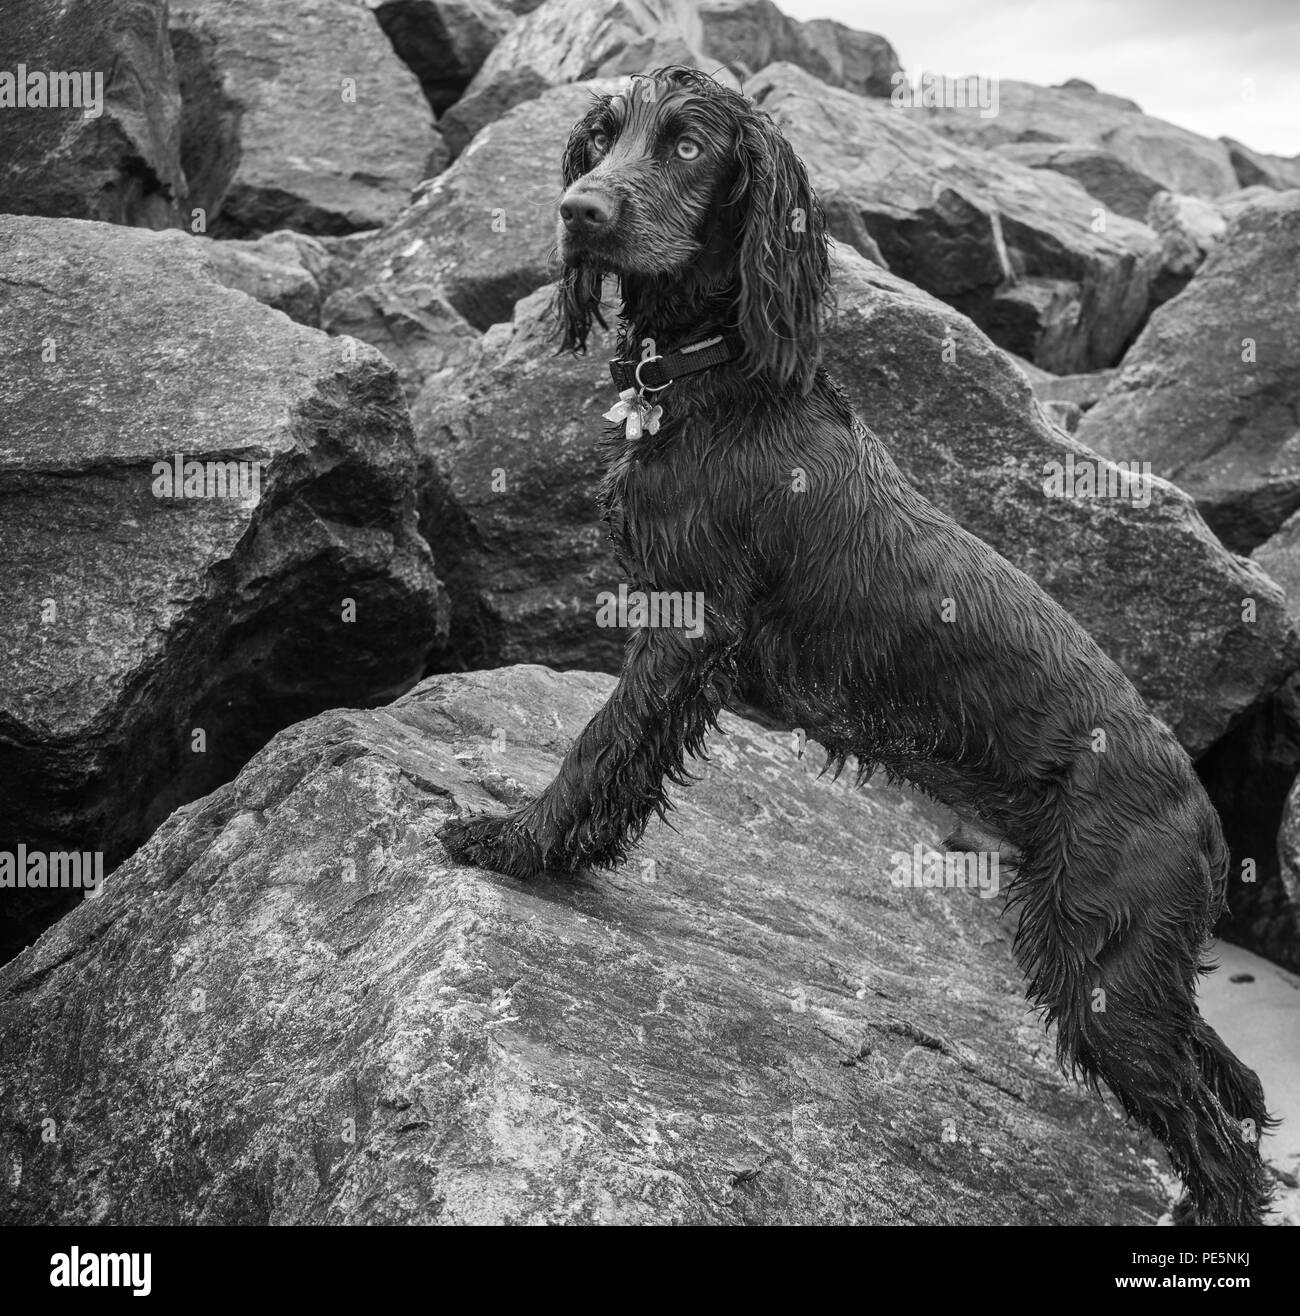 A springer spaniel alert and ready to spring! Stock Photo